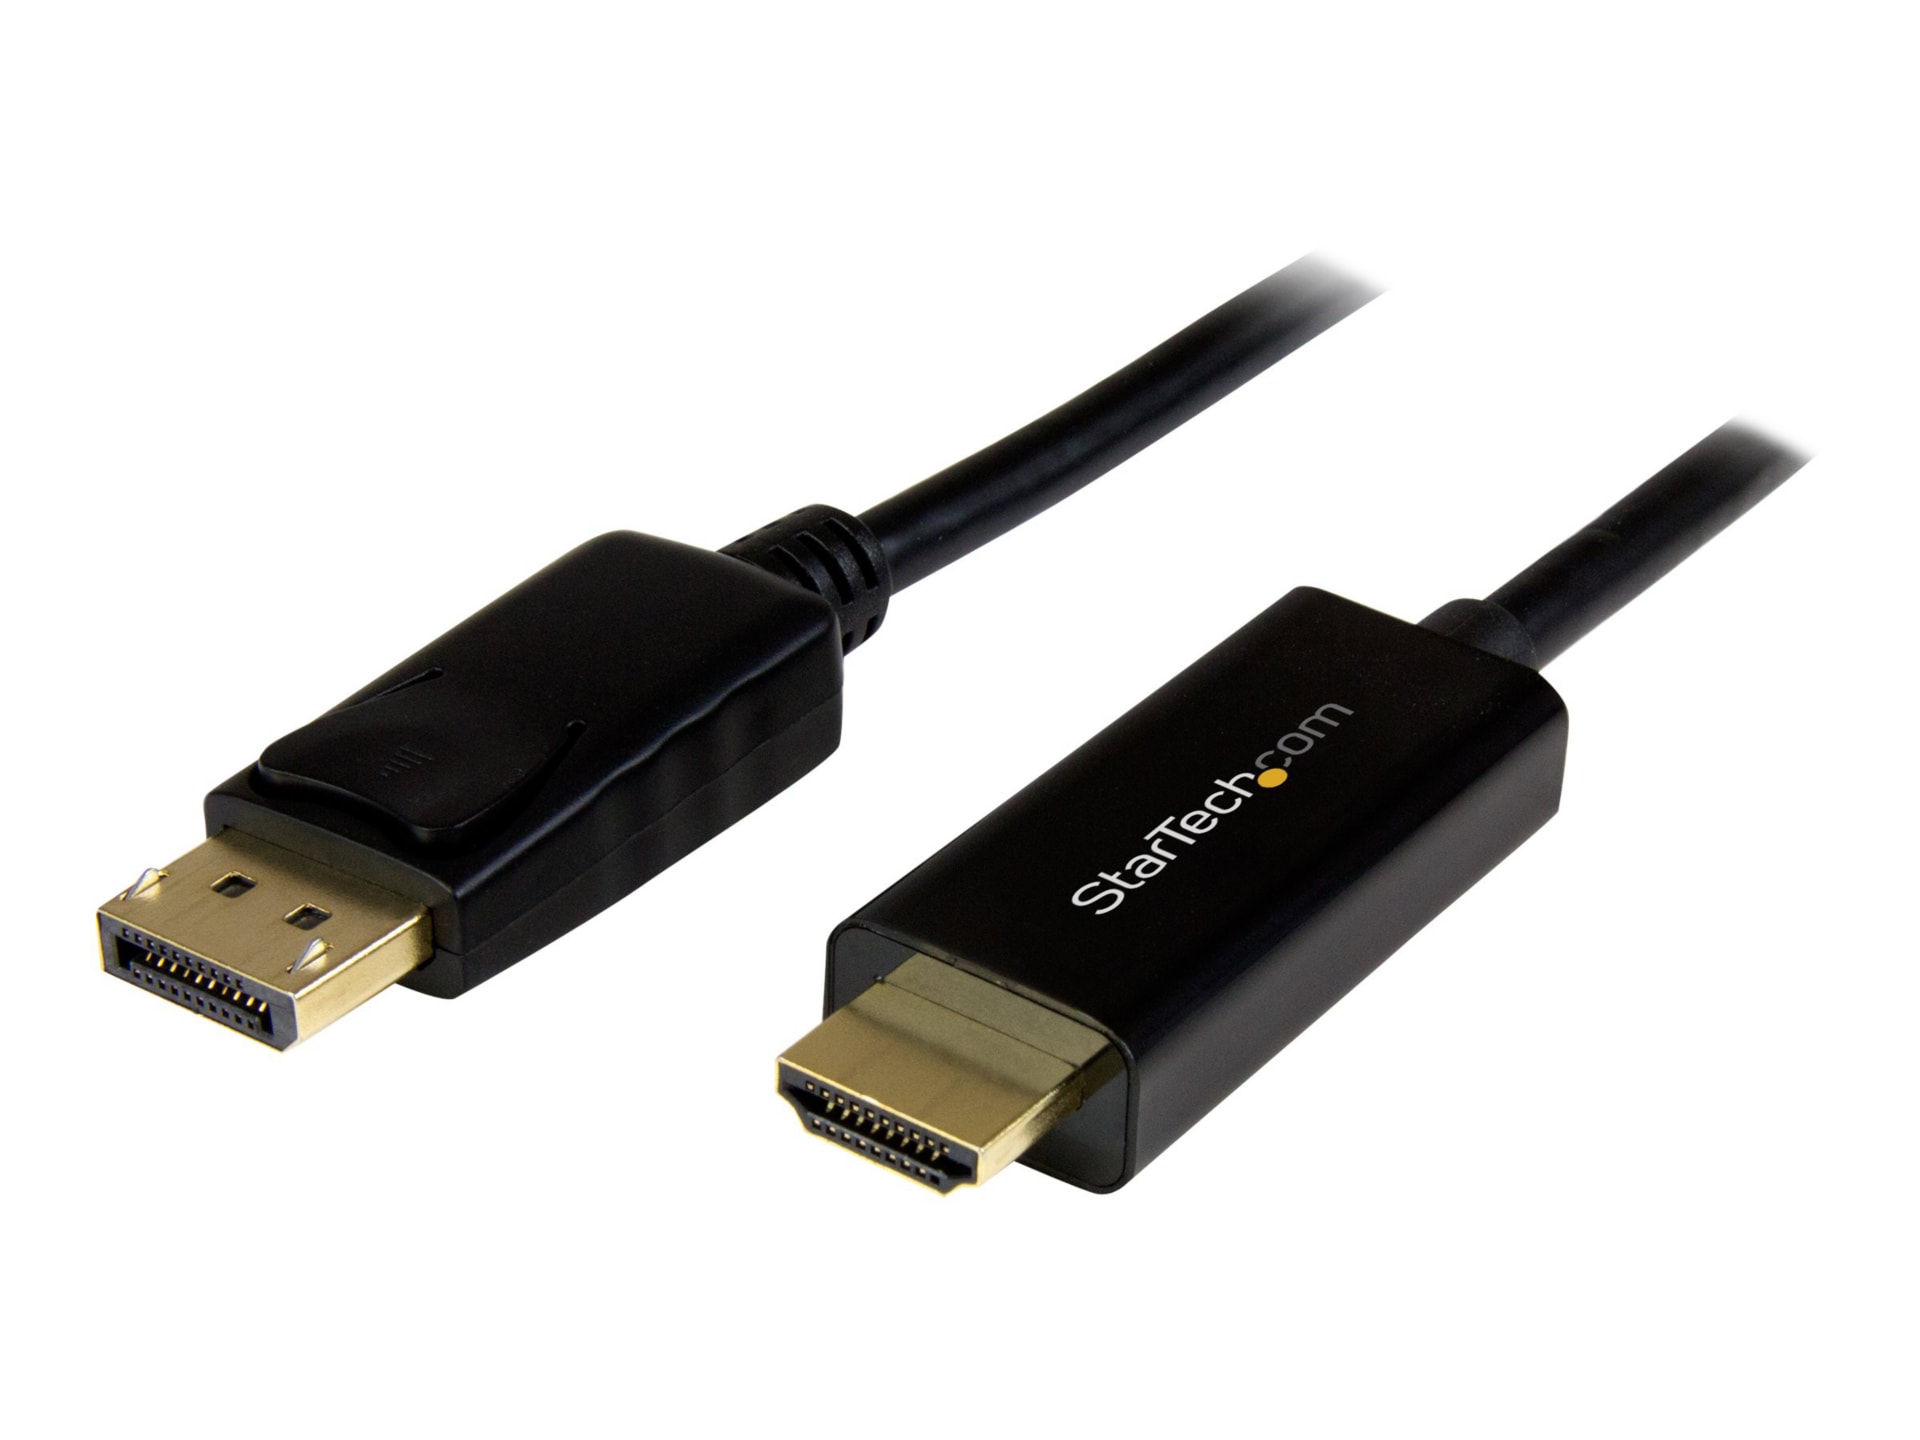 StarTech.com 6ft (2m) DisplayPort to HDMI Cable, 4K 30Hz Video, DP 1.2 to HDMI Adapter Cable Converter for HDMI